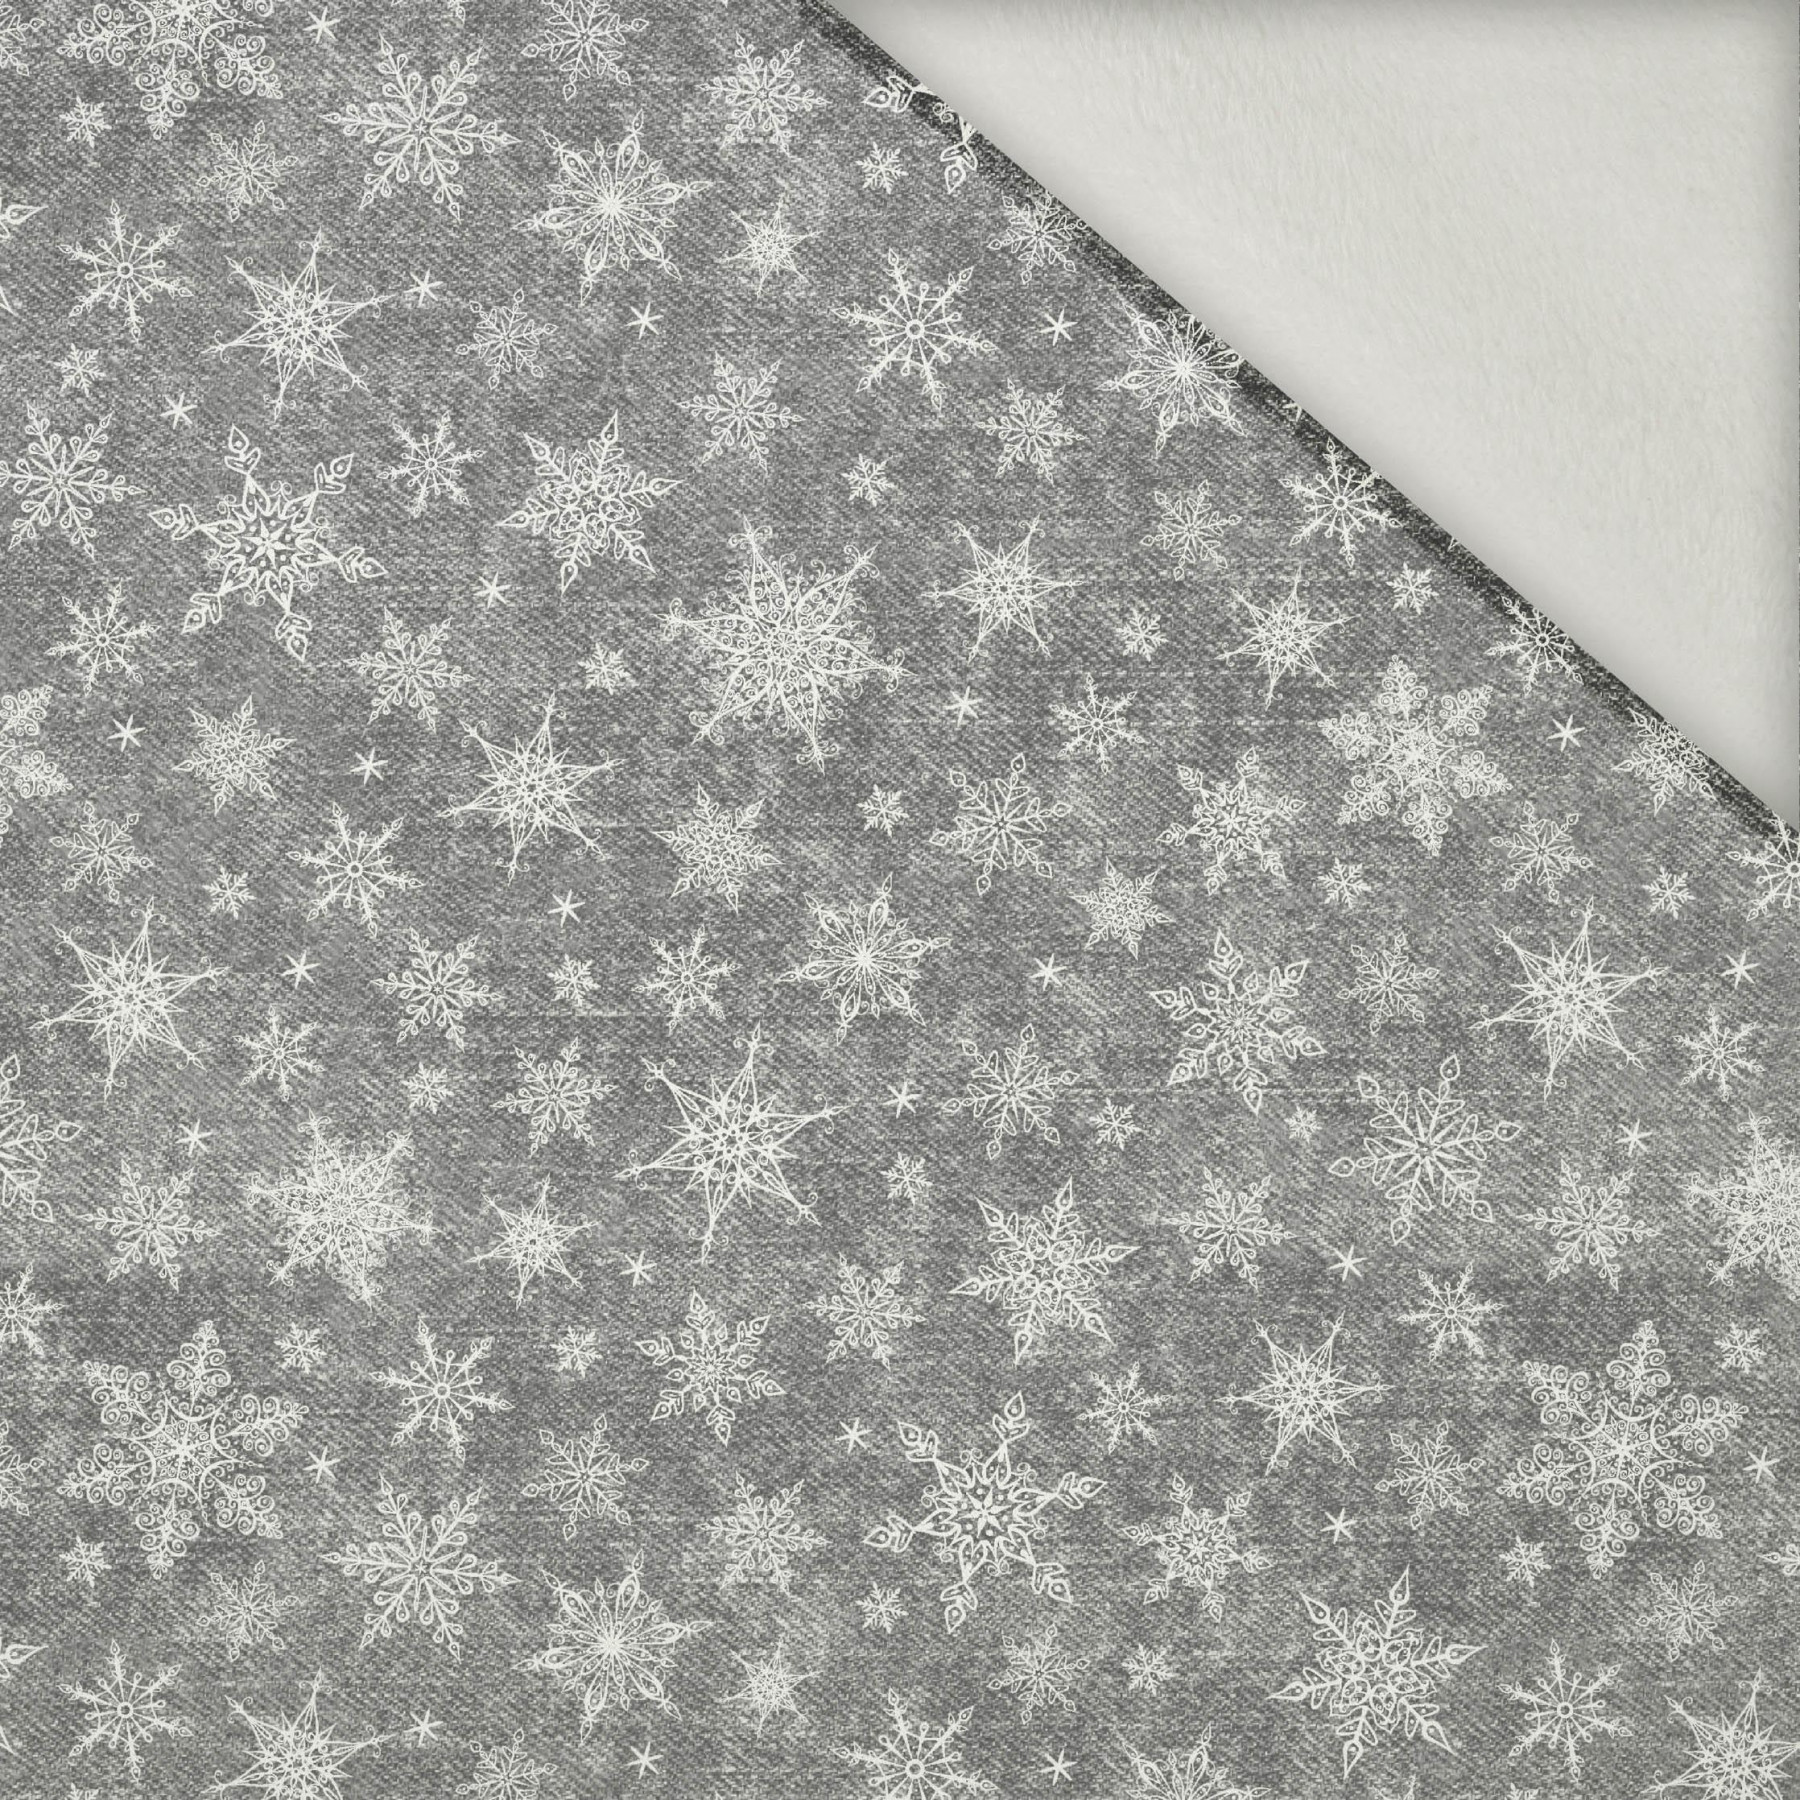 SNOWFLAKES PAT. 2 / ACID WASH GREY  - brushed knit fabric with teddy / alpine fleece